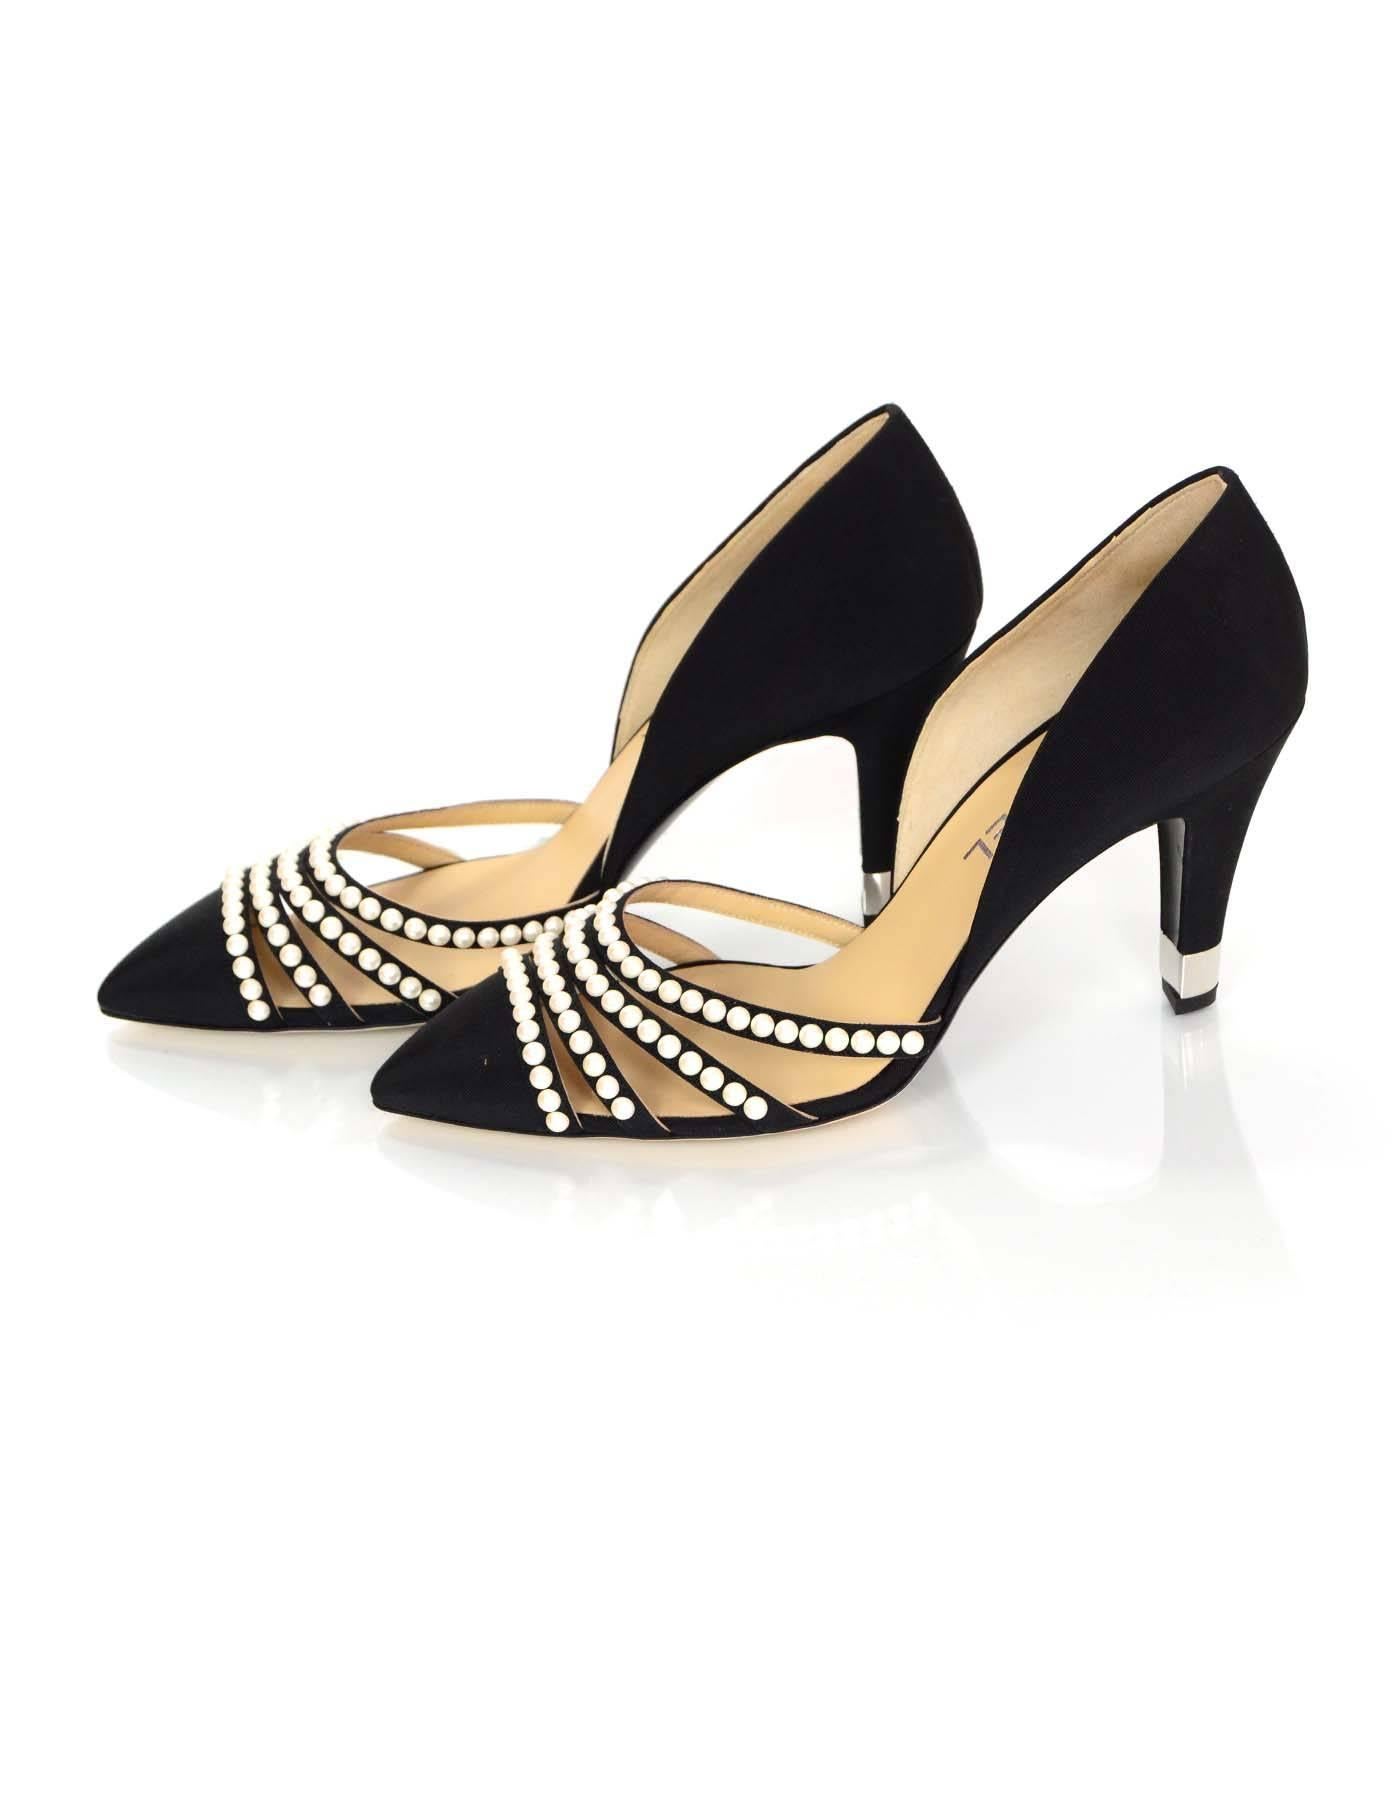 Chanel Black Grosgrain and Faux Pearl D'Orsay Pumps Sz 39.5 NIB
Features pointed toes and faux pearl details

Made In: Italy
Year Of Production: 2016
Color: Black and white
Retail Price: $1,100 + tax
Materials: Grosgrain and faux